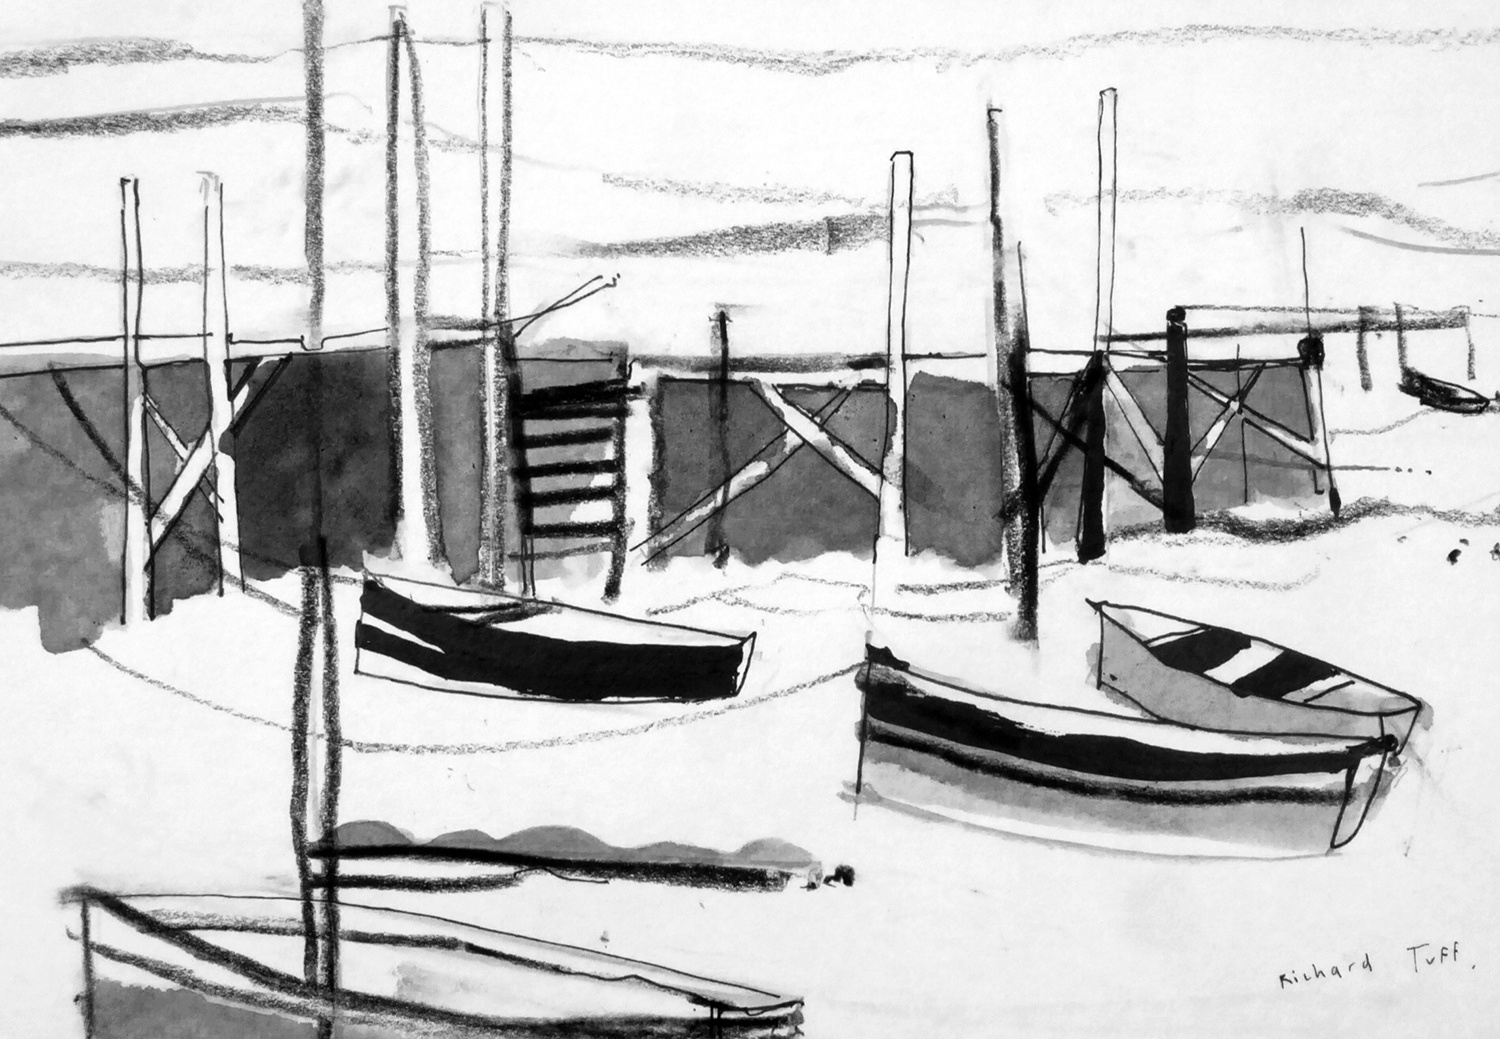 Boats by the Jetty by Richard Tuff